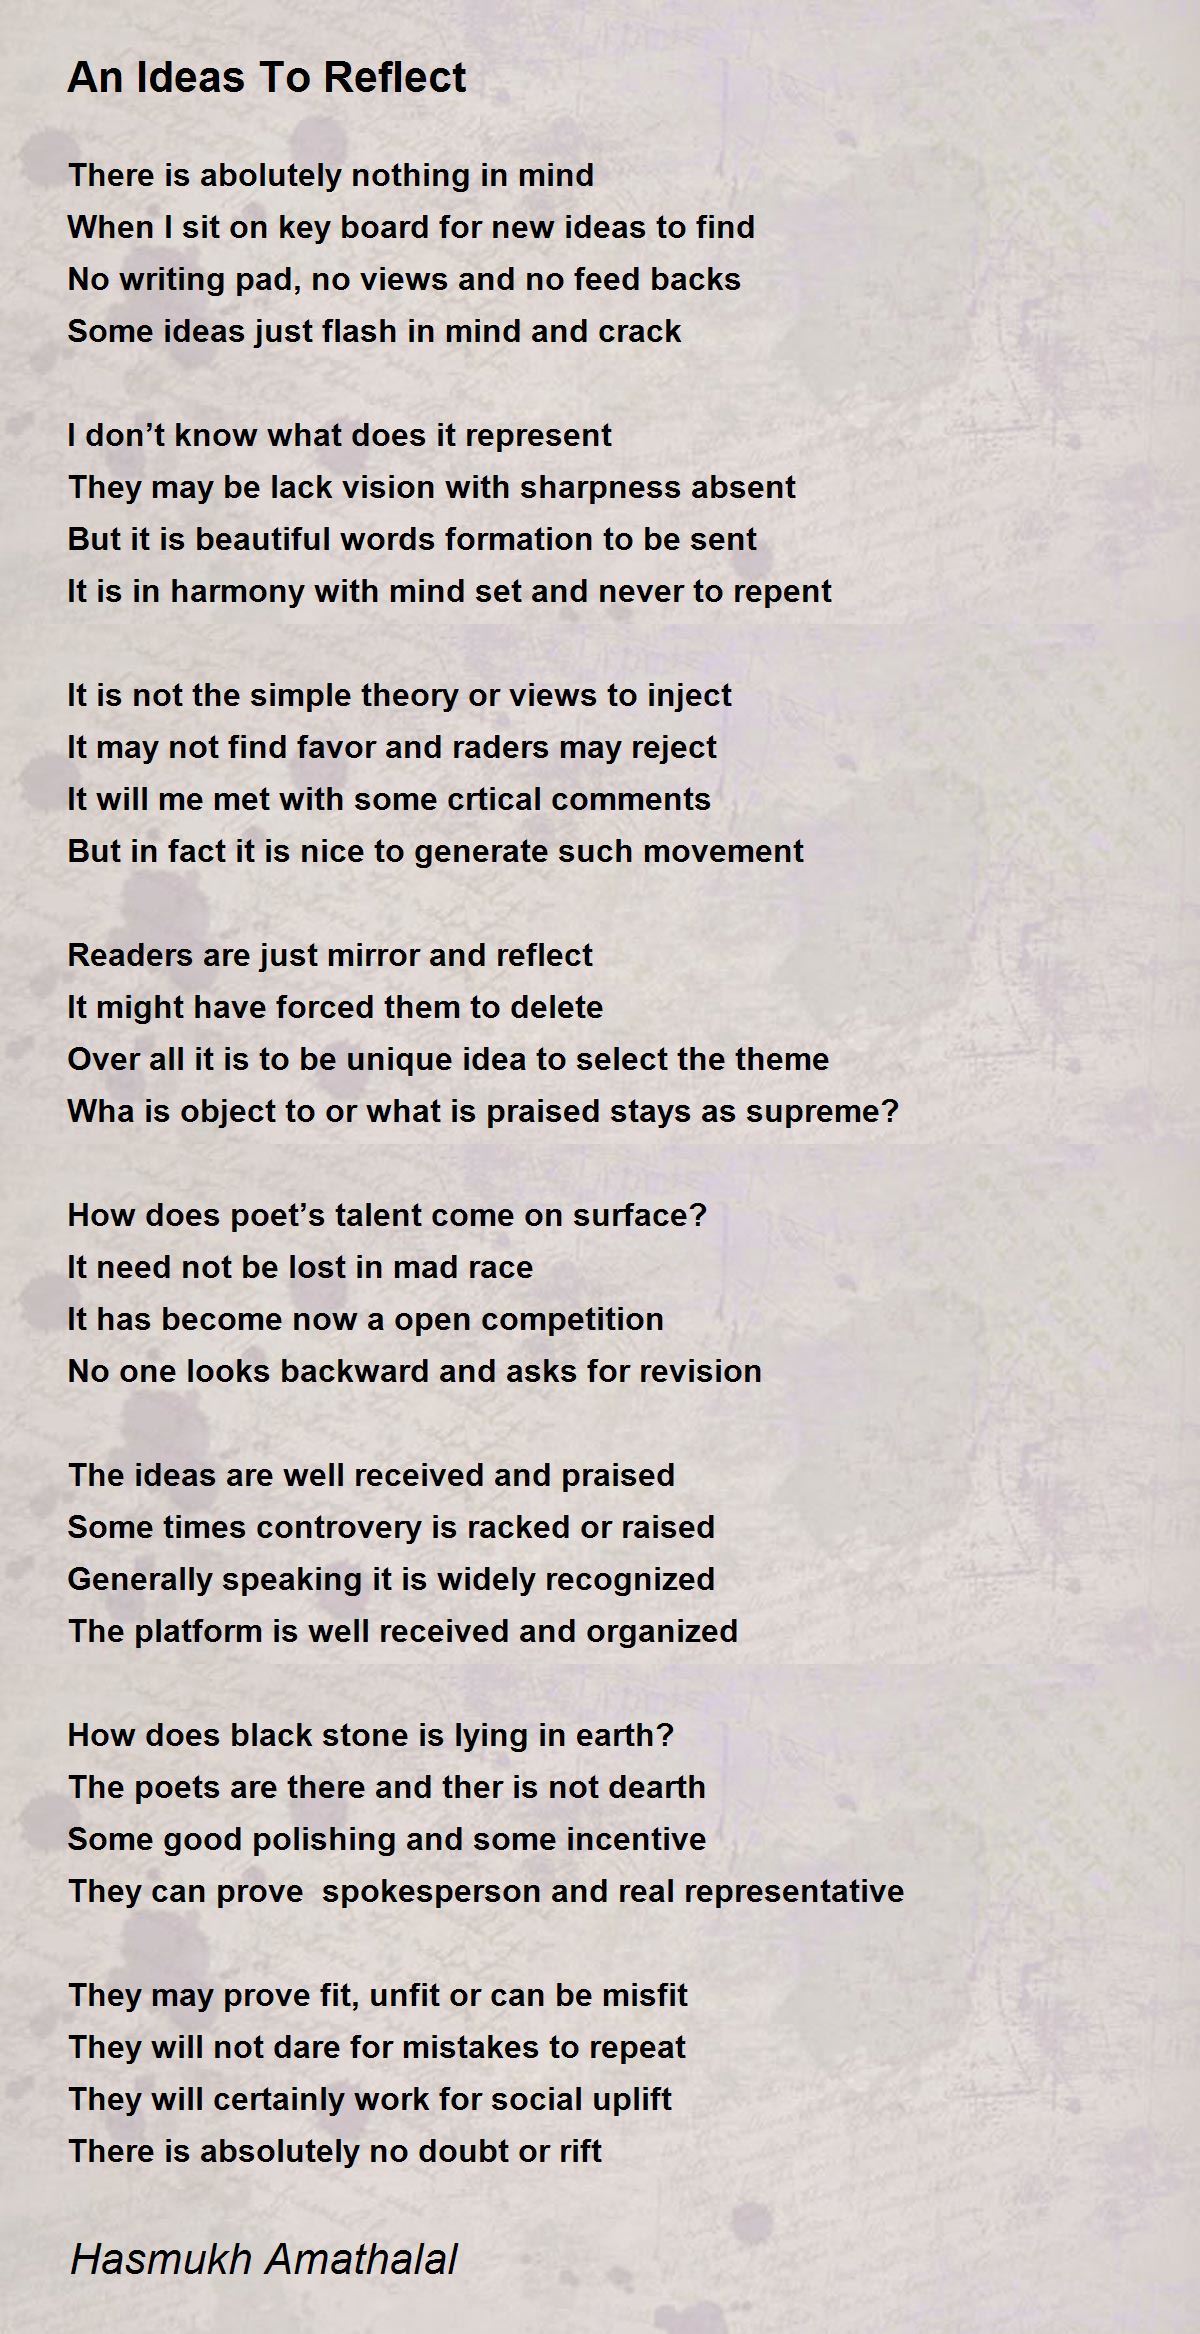 An Ideas To Reflect - An Ideas To Reflect Poem by Mehta Hasmukh